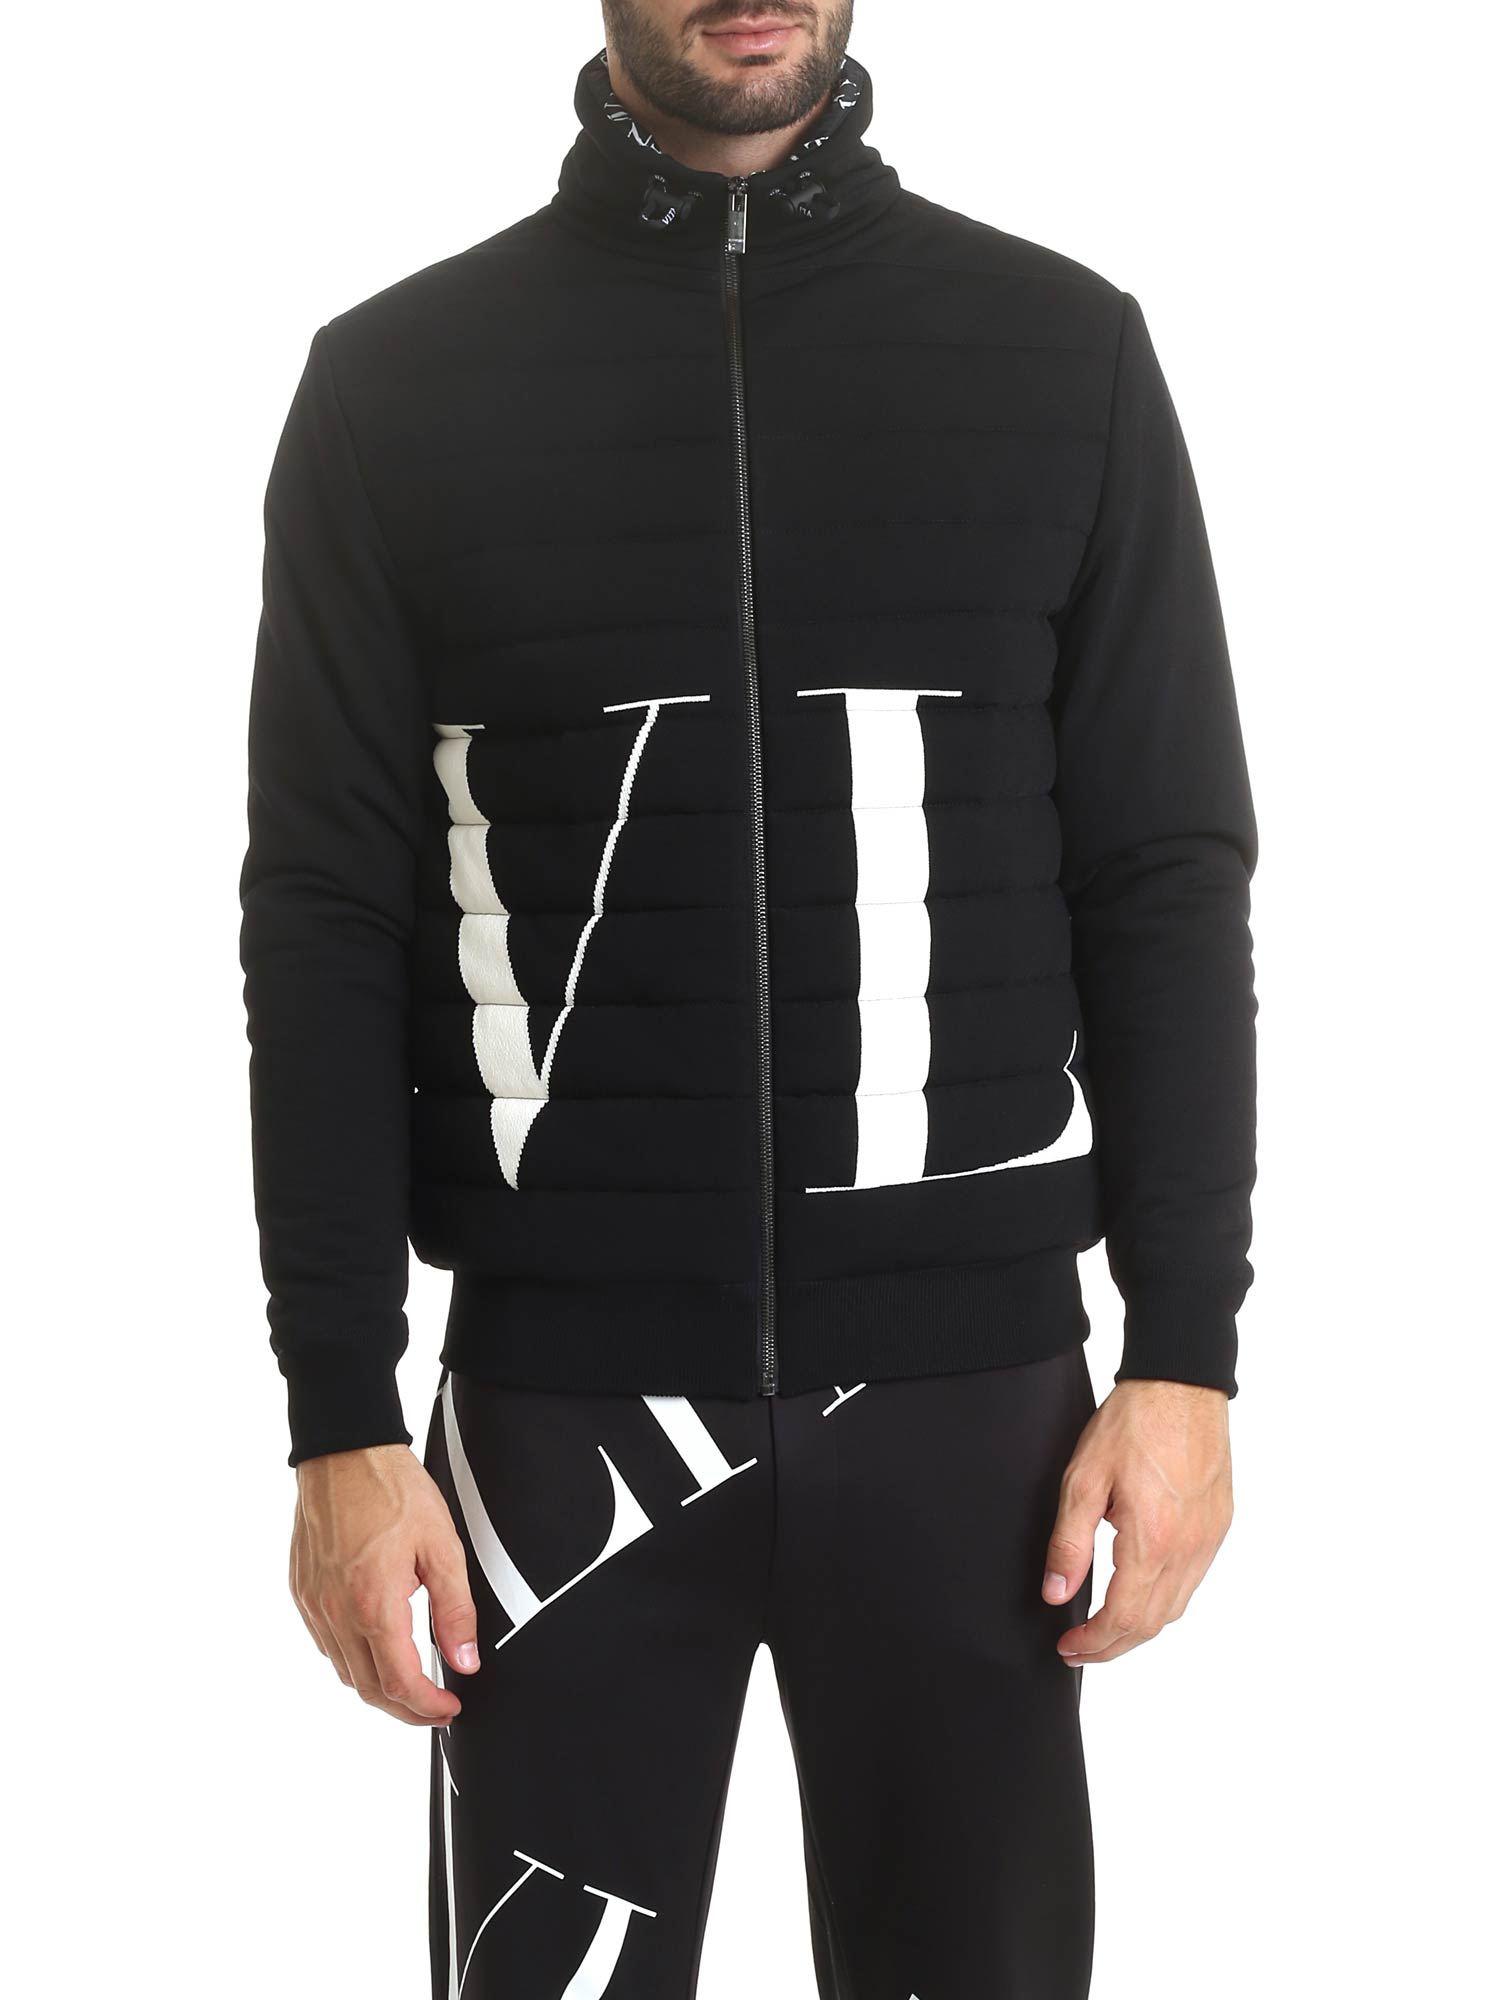 Valentino Synthetic Black Jacket With Vltn Print for Men - Lyst